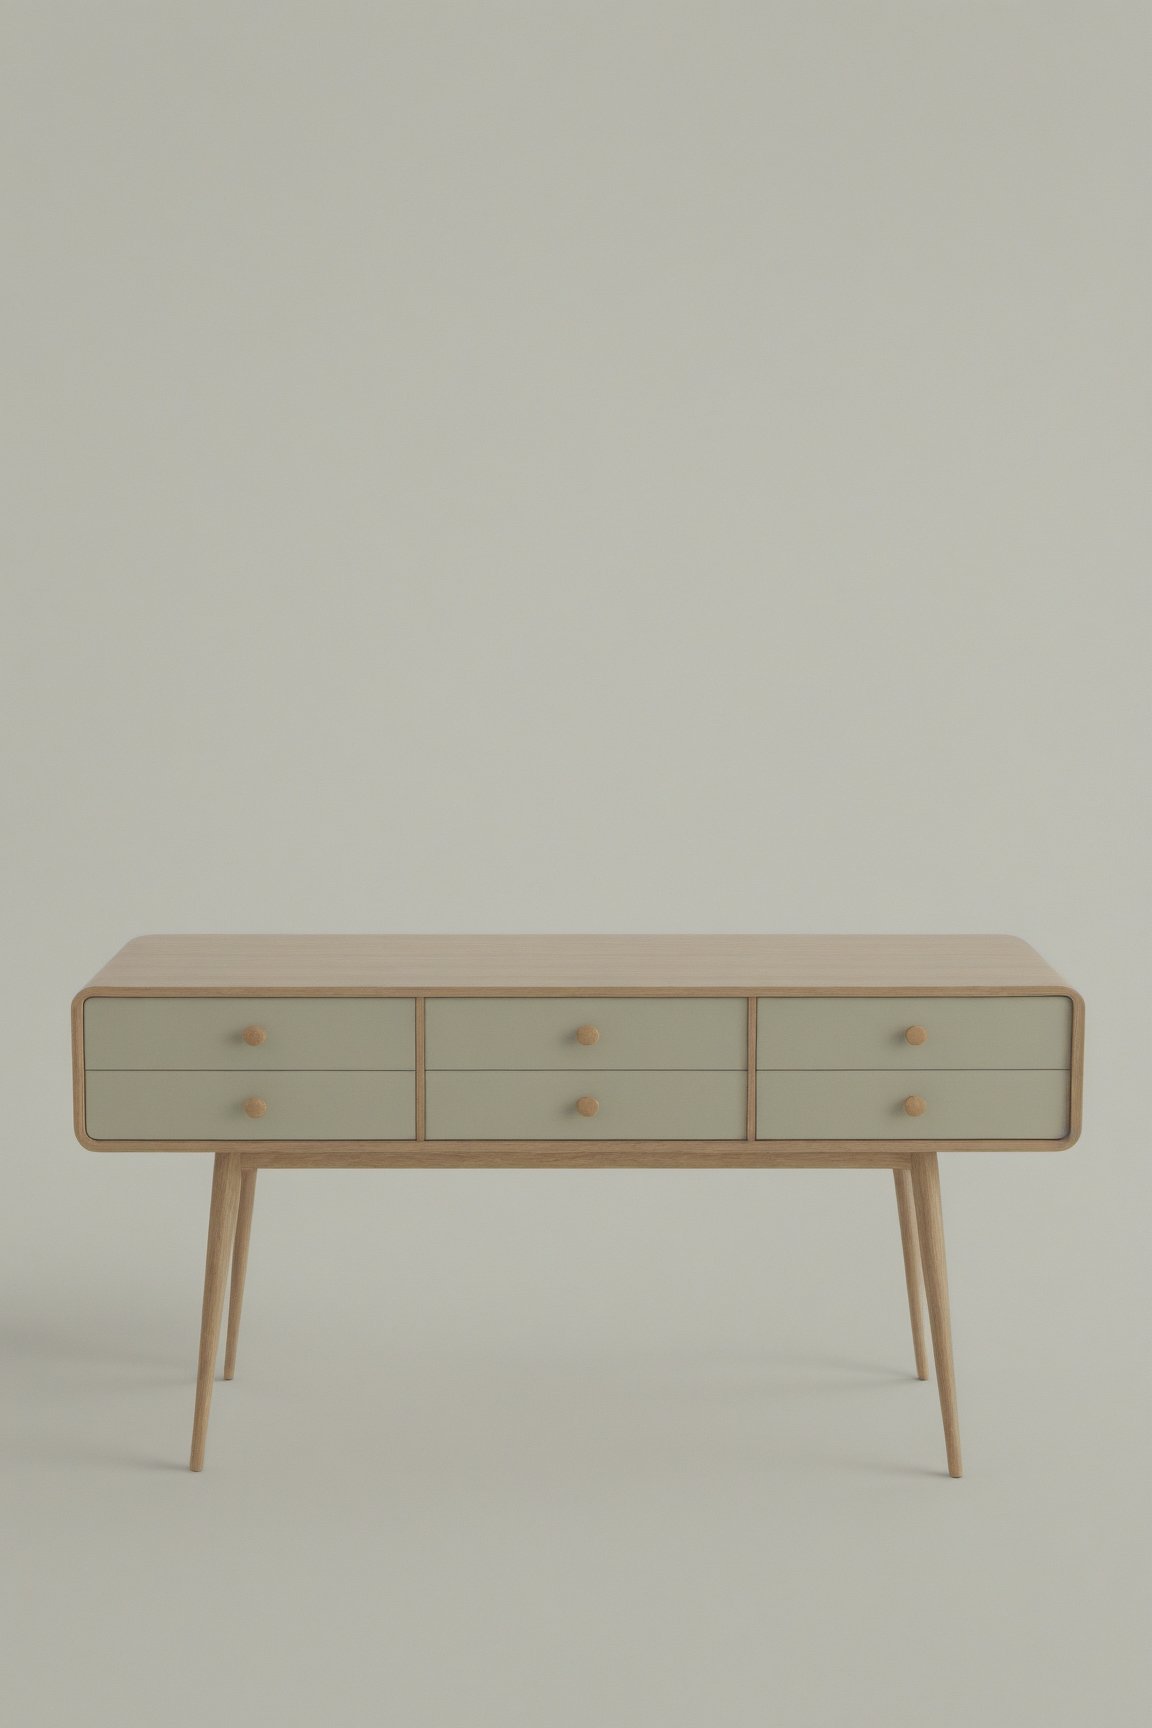 (best quality,  highres,  ultra high resolution,  masterpiece,  realistic,  extremely photograph,  detailed photo,  8K wallpaper,  intricate detail,  film grains),  High definition photorealistic photography of ultra luxury, Design concept for a center table with drawers, entirely crafted from assembled wood in a Scandinavian style. Featuring rounded corners, fine woodwork, and pastel colors. The table should be showcased empty against a neutral backdrop, embodying the serene and tranquil essence of Scandinavian minimalism. This is a photographic scene designed with advanced photography, CGI, and VFX parameters, in high definition, ensuring flawless execution, high level of intricacy in the image.